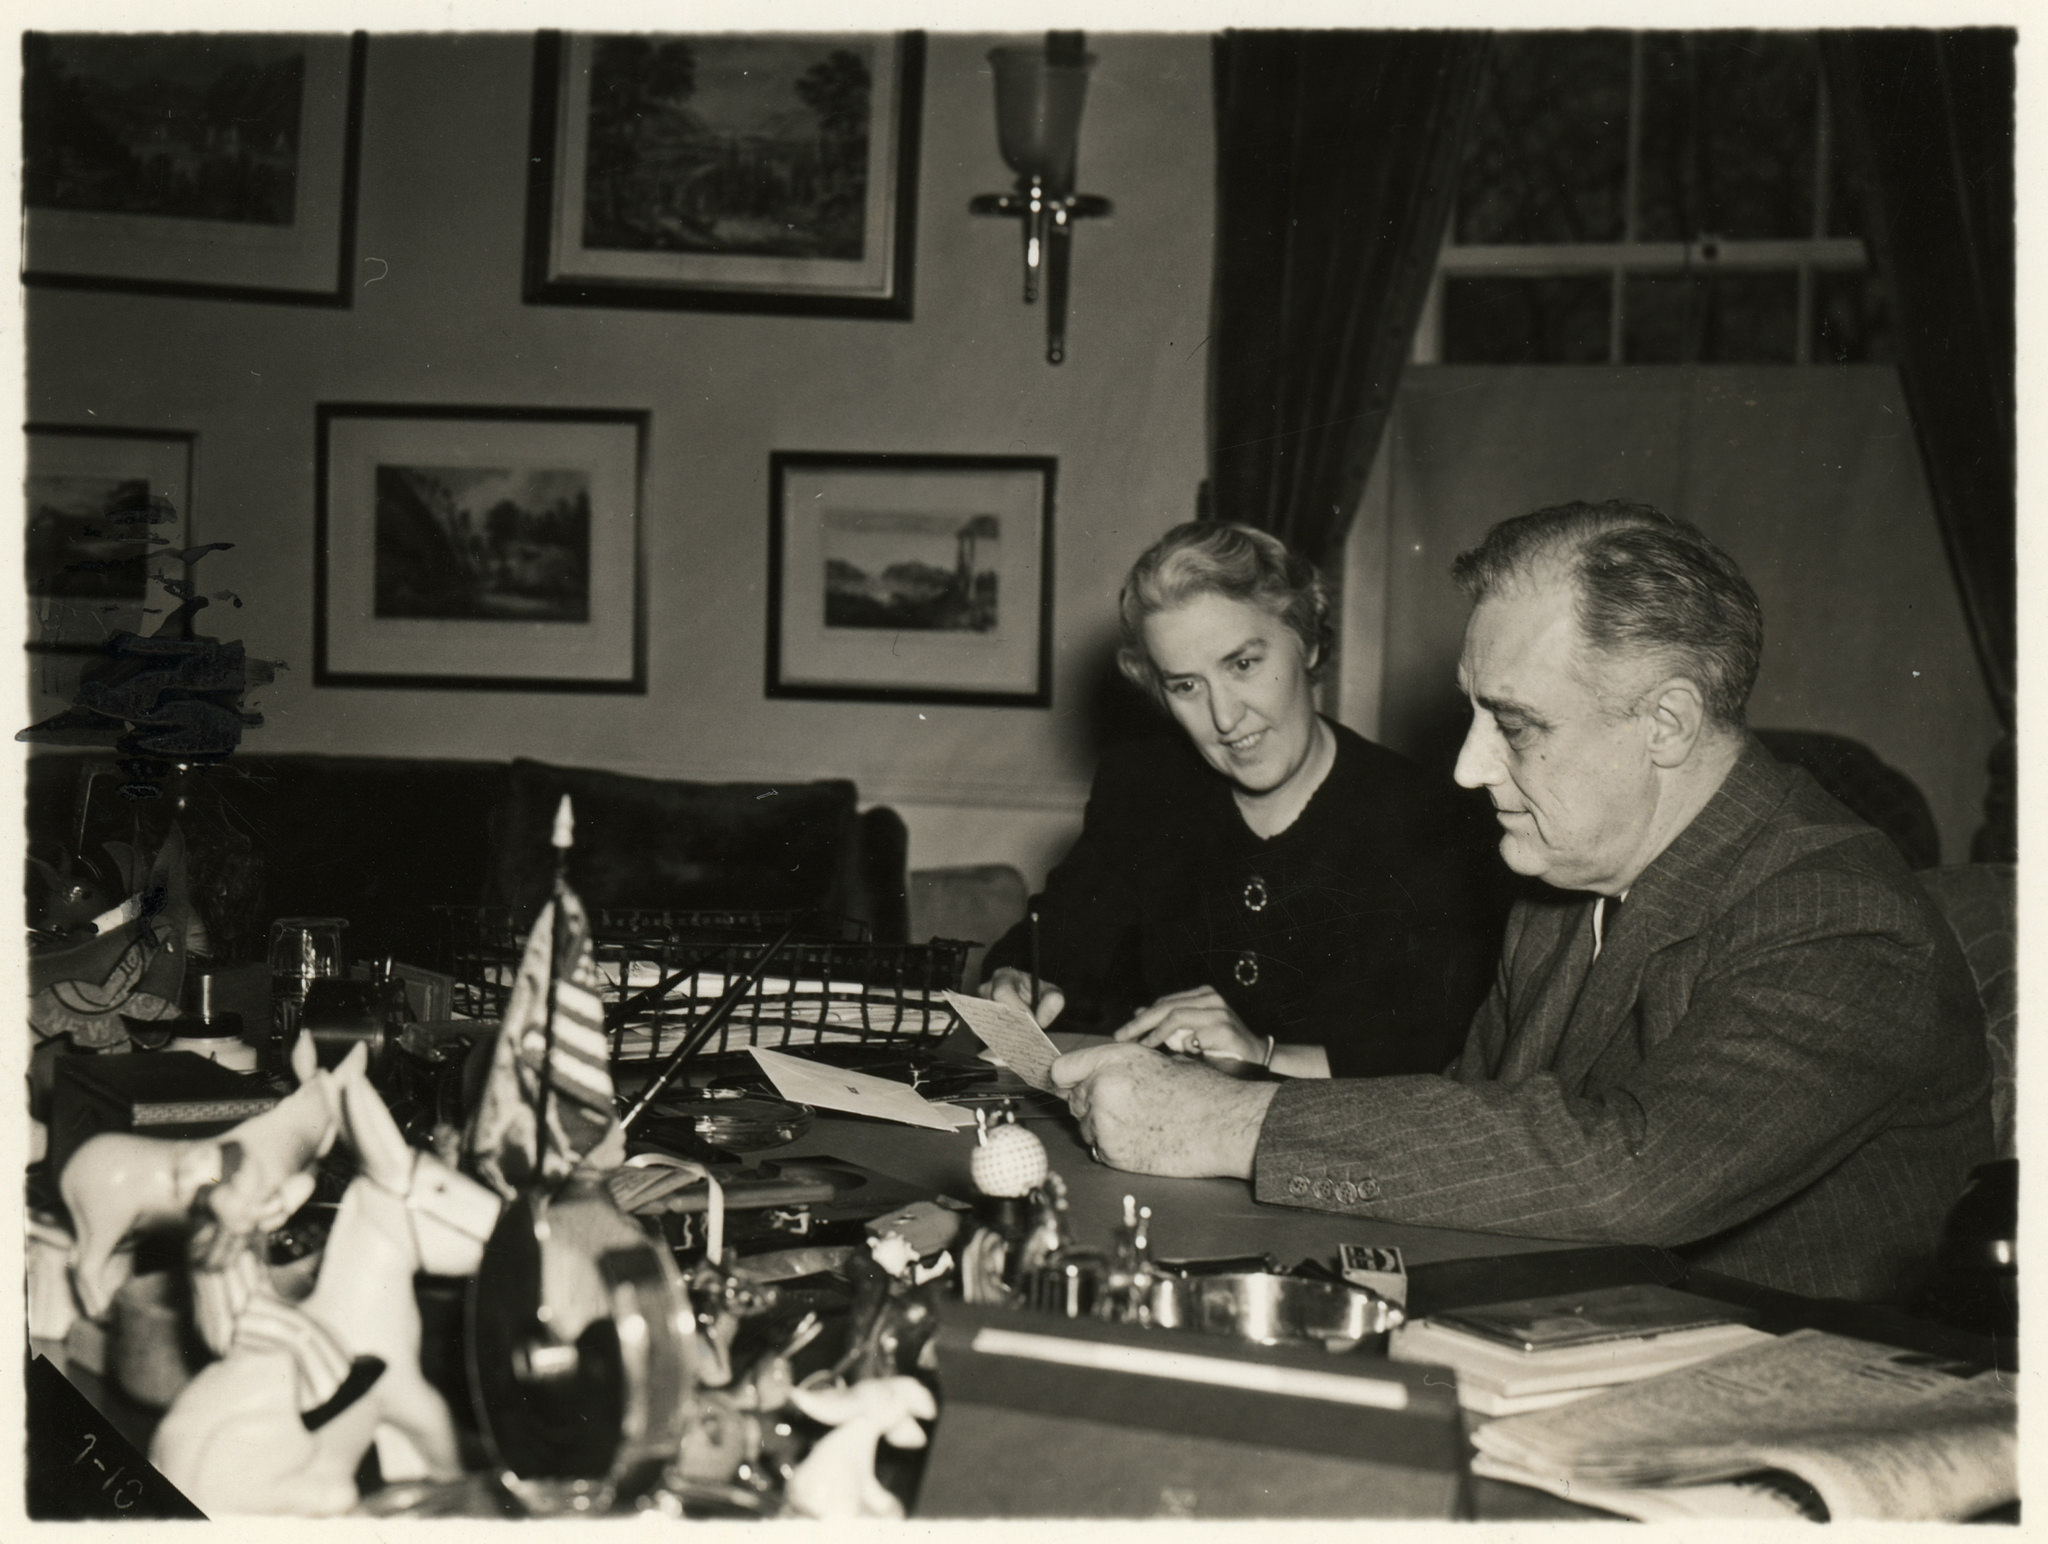 Missy LeHand and FDR work together in the White House, May 22, 1941. NPx 48-22 3713(24)